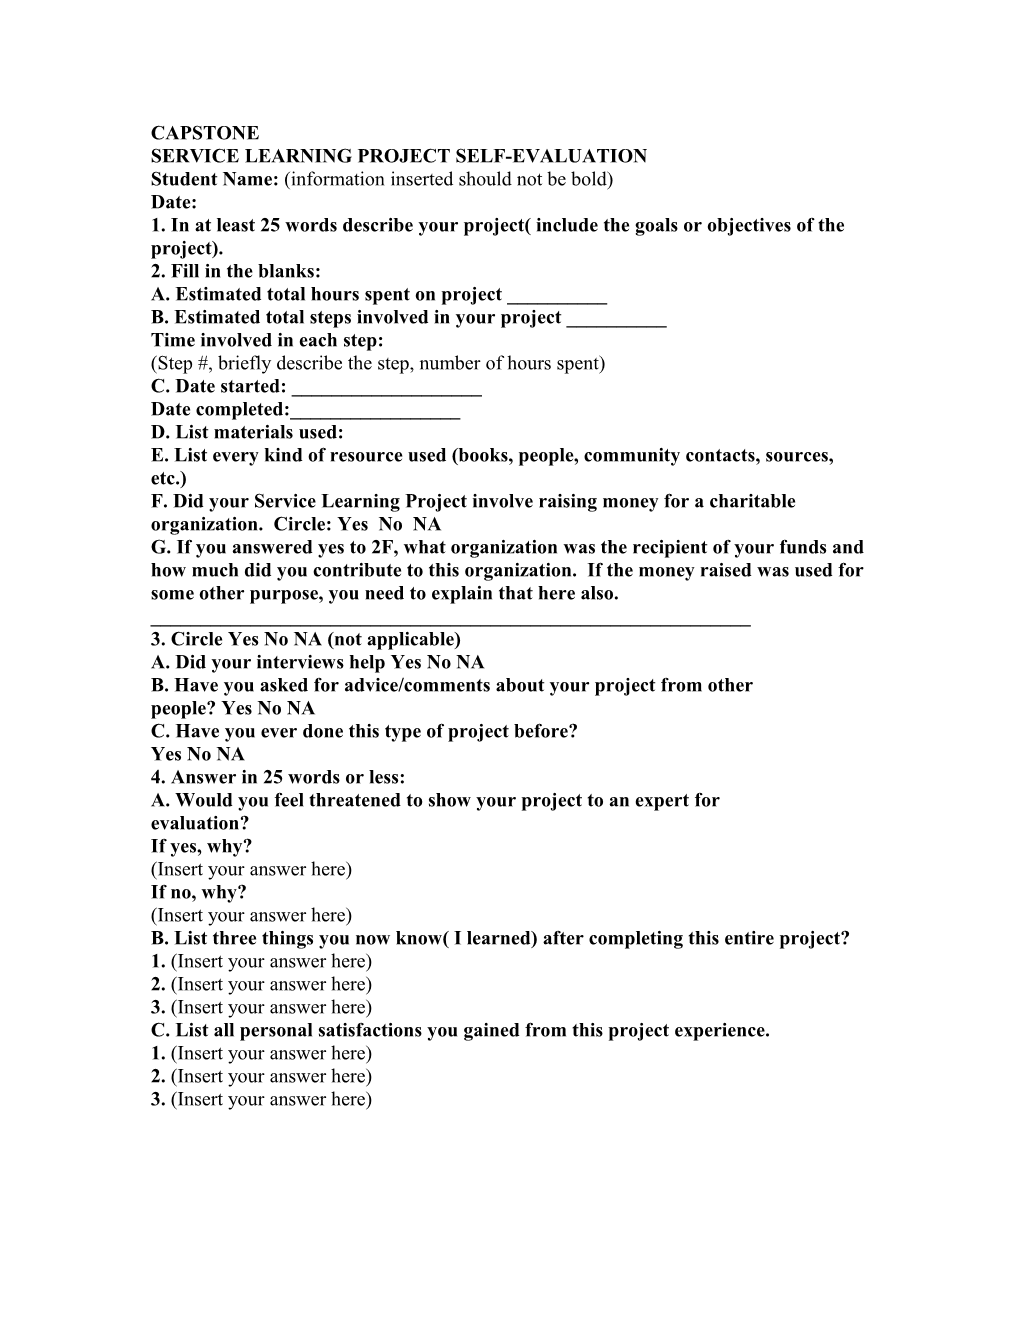 Service Learning Project Self-Evaluation